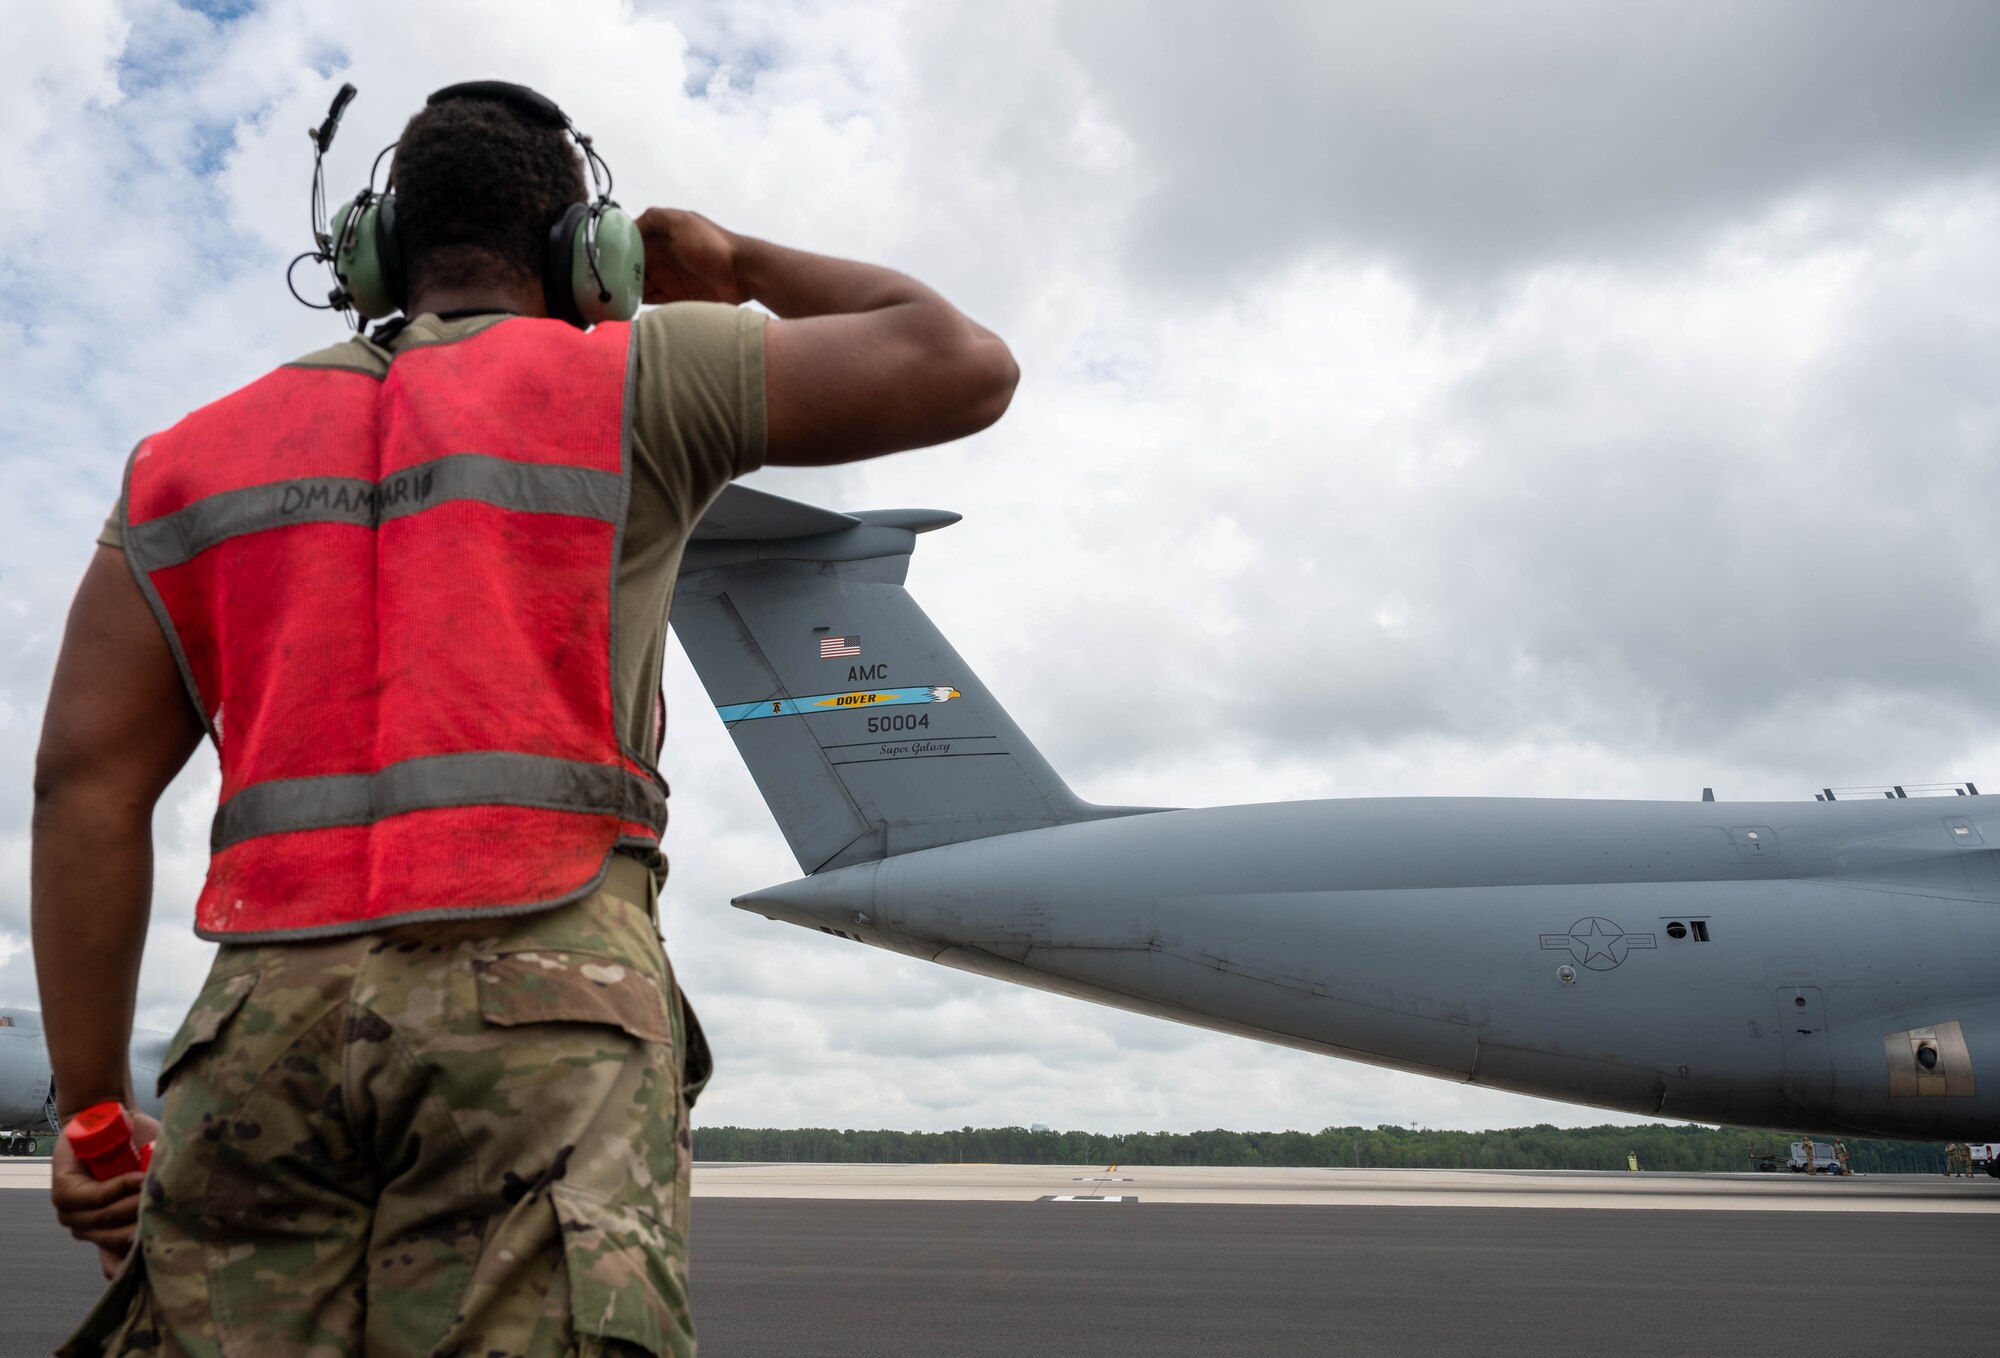 Senior Airman Deondre Douglas, 512th Maintenance Squadron, salutes a C-5M Super Galaxy as it taxis before taking off to Hamid Karzai International Airport, Afghanistan from Dover Air Force Base, Delaware, Aug. 16, 2021. Air Mobility Airmen play a key role in facilitating the safe departure and relocation of U.S. citizens, Special Immigration Visa recipients, and vulnerable Afghan populations from Afghanistan. (U.S. Air Force photo by Senior Airman Faith Schaefer)